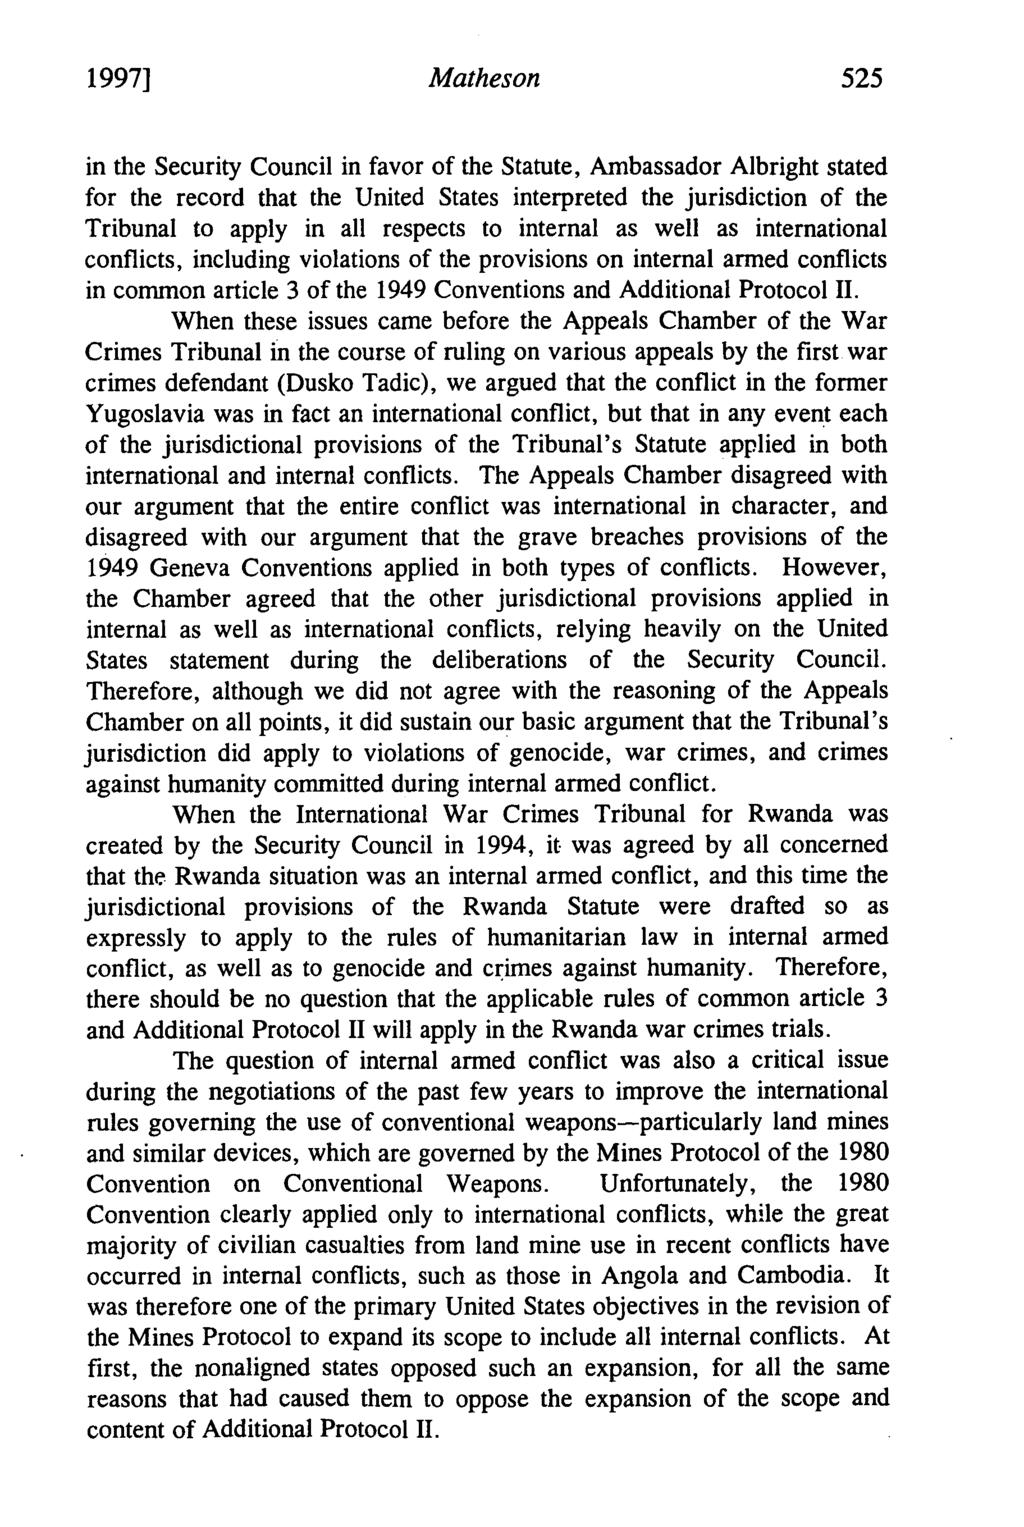 1997] Matheson 525 in the Security Council in favor of the Statute, Ambassador Albright stated for the record that the United States interpreted the jurisdiction of the Tribunal to apply in all